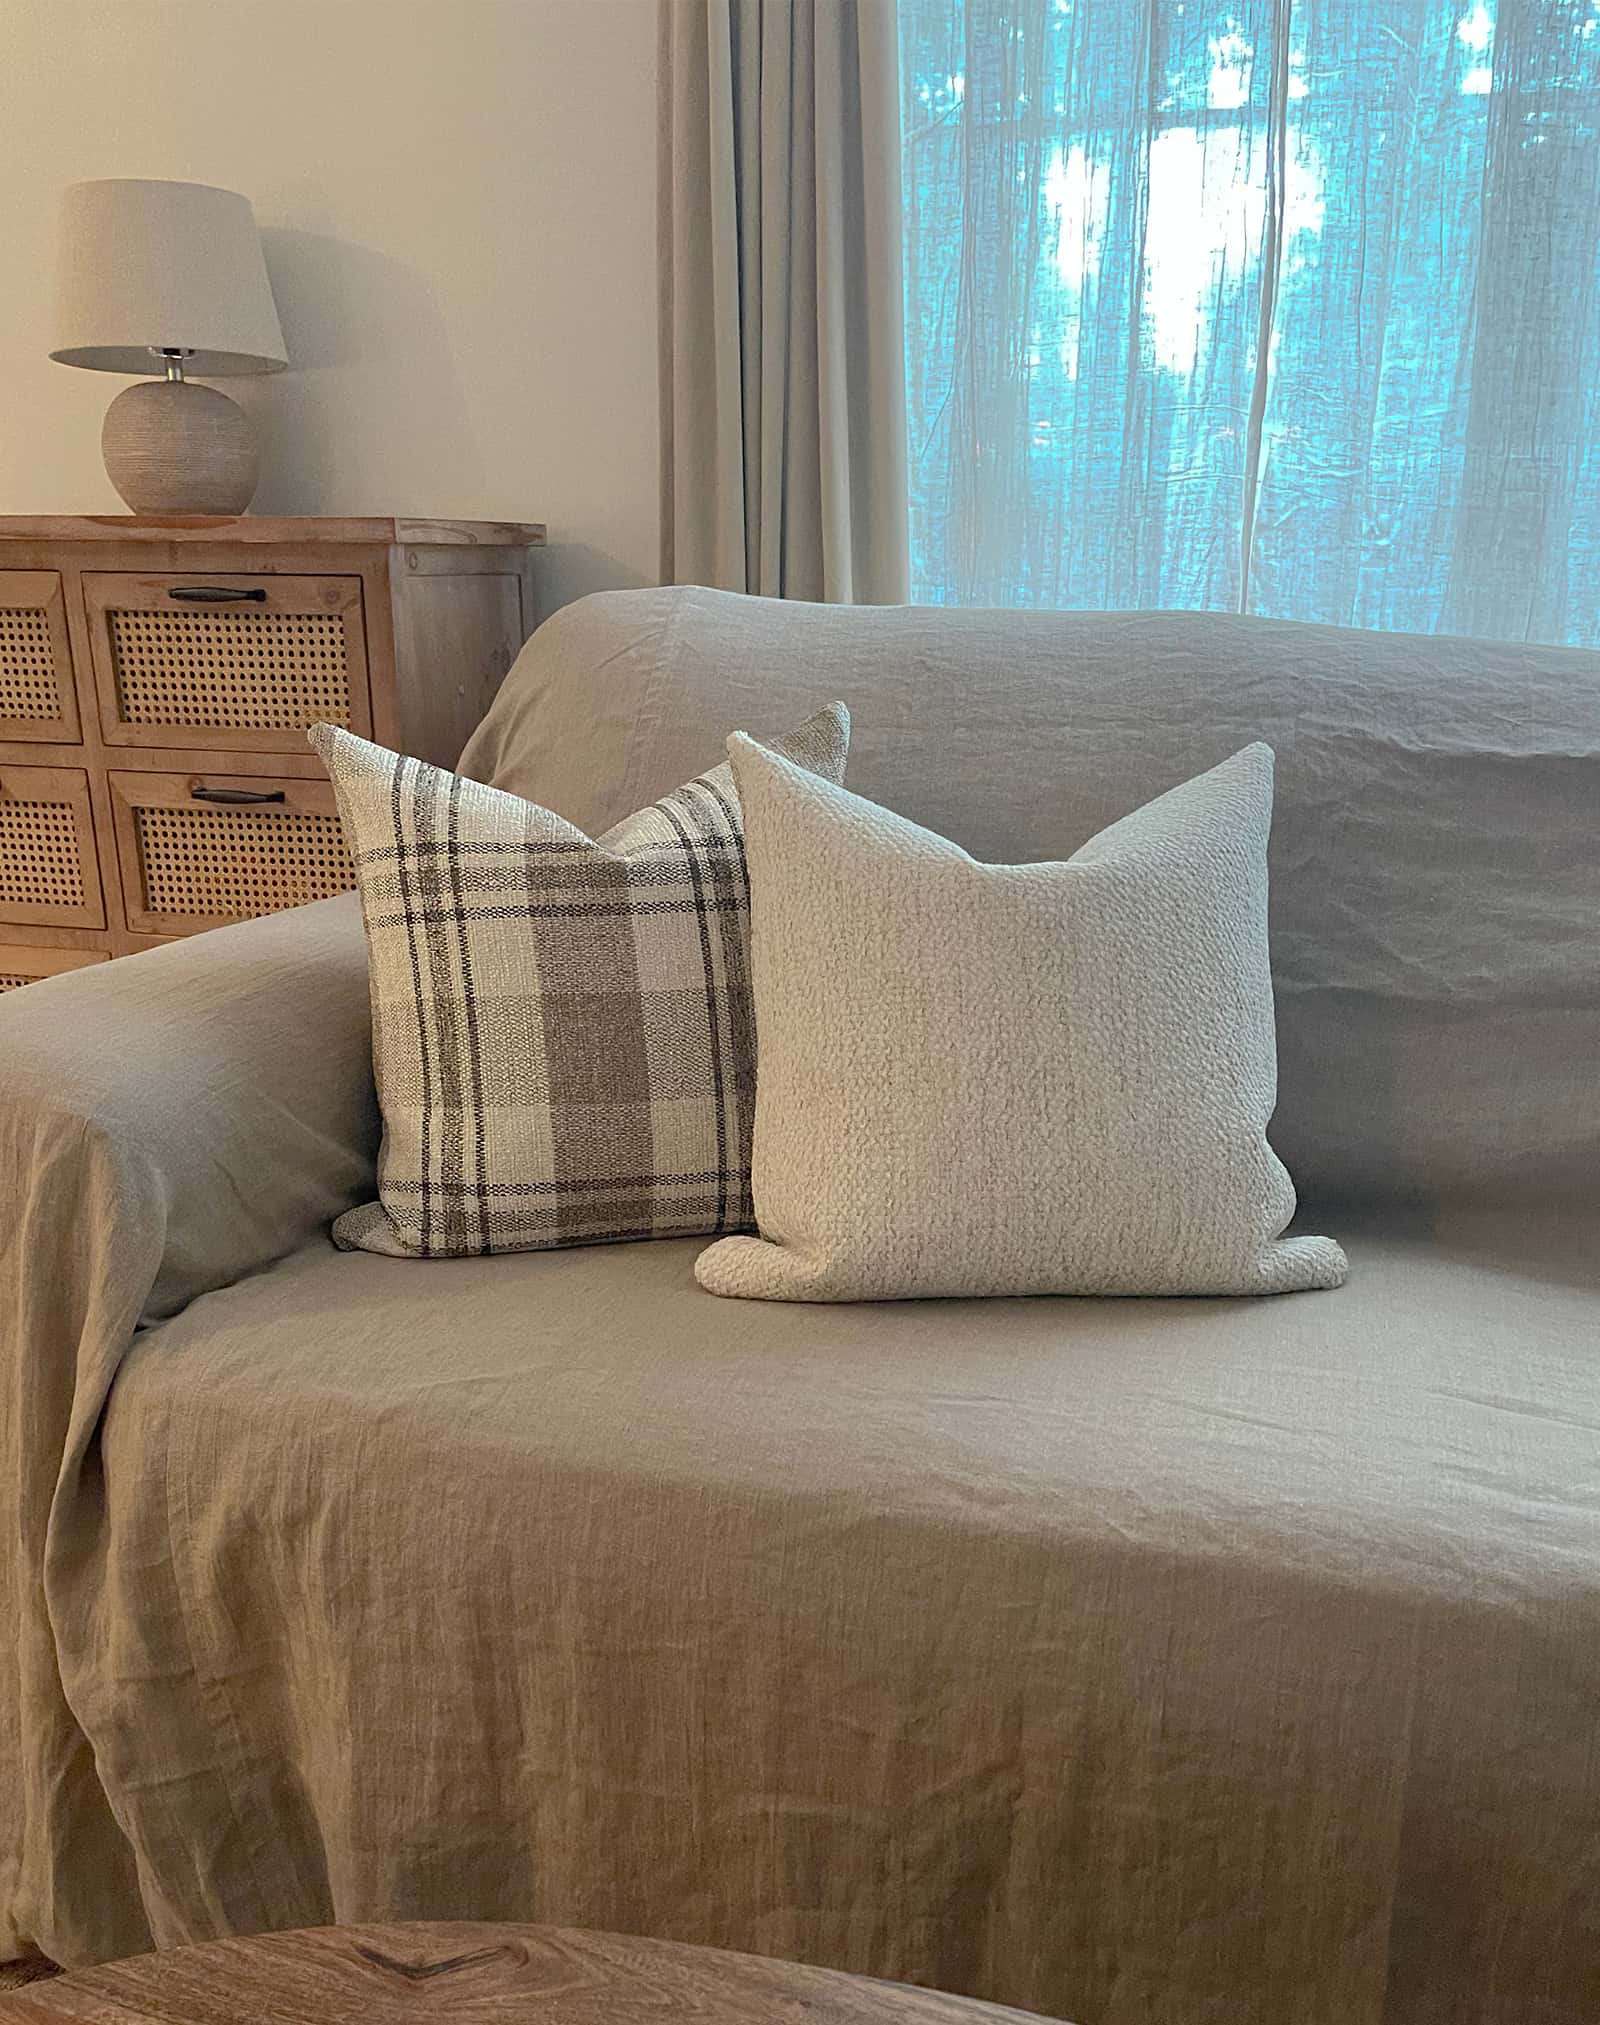 Creamy wheat colored boucle pillow paired with neutral plaid throw pillow for linen sofa creates a cozy space for fall and all seasons